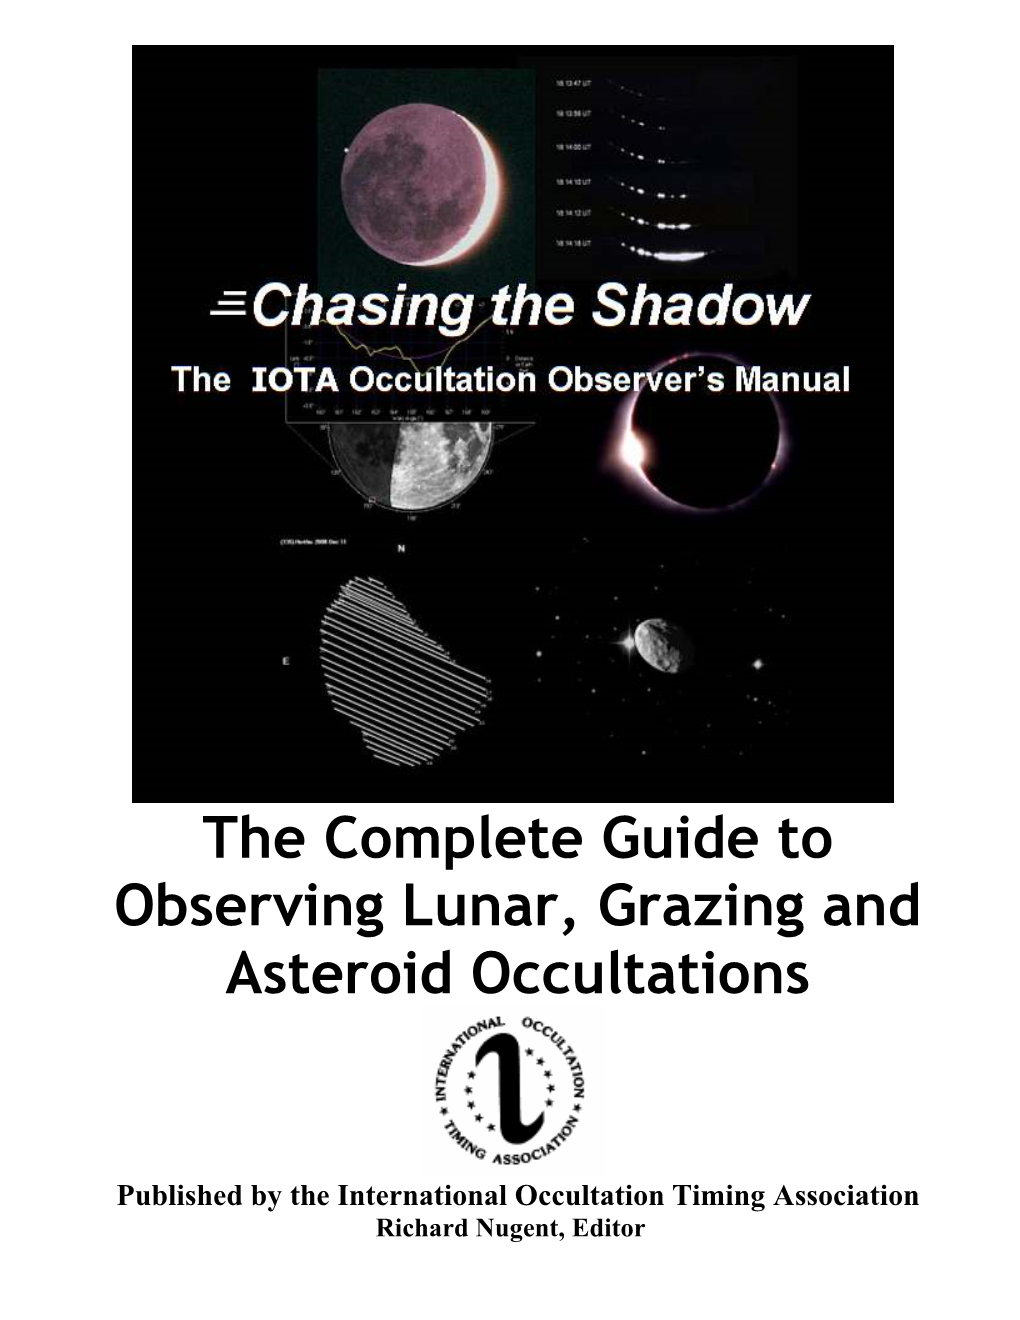 The Complete Guide to Observing Lunar, Grazing and Asteroid Occultations